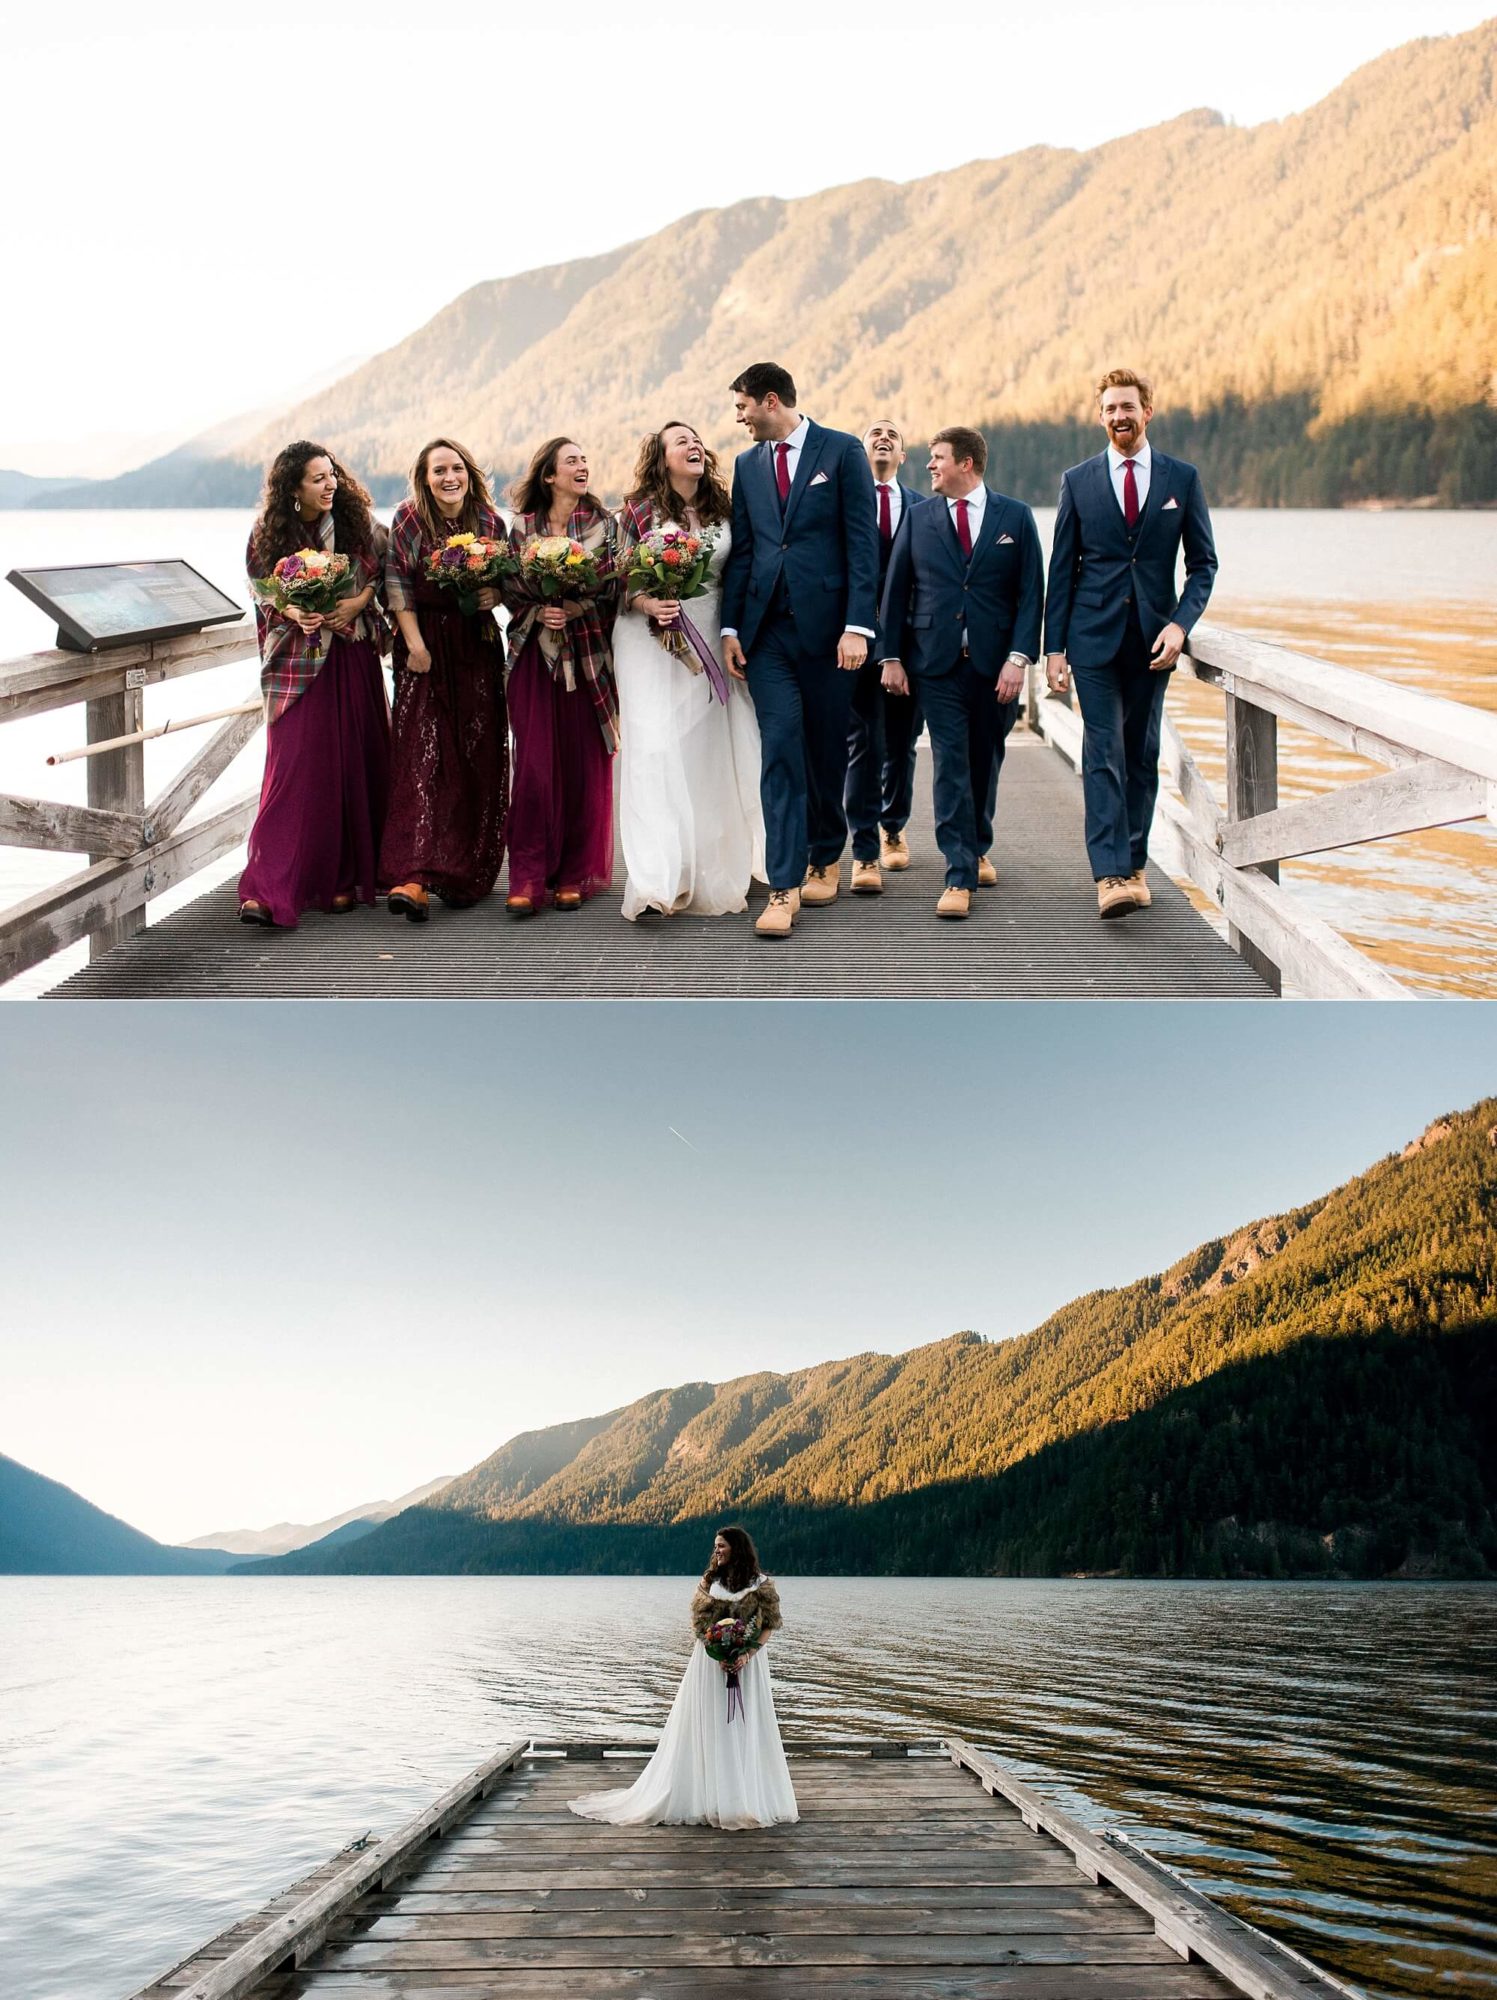 Bridal party on the dock at sunset at Lake Crescent Lodge